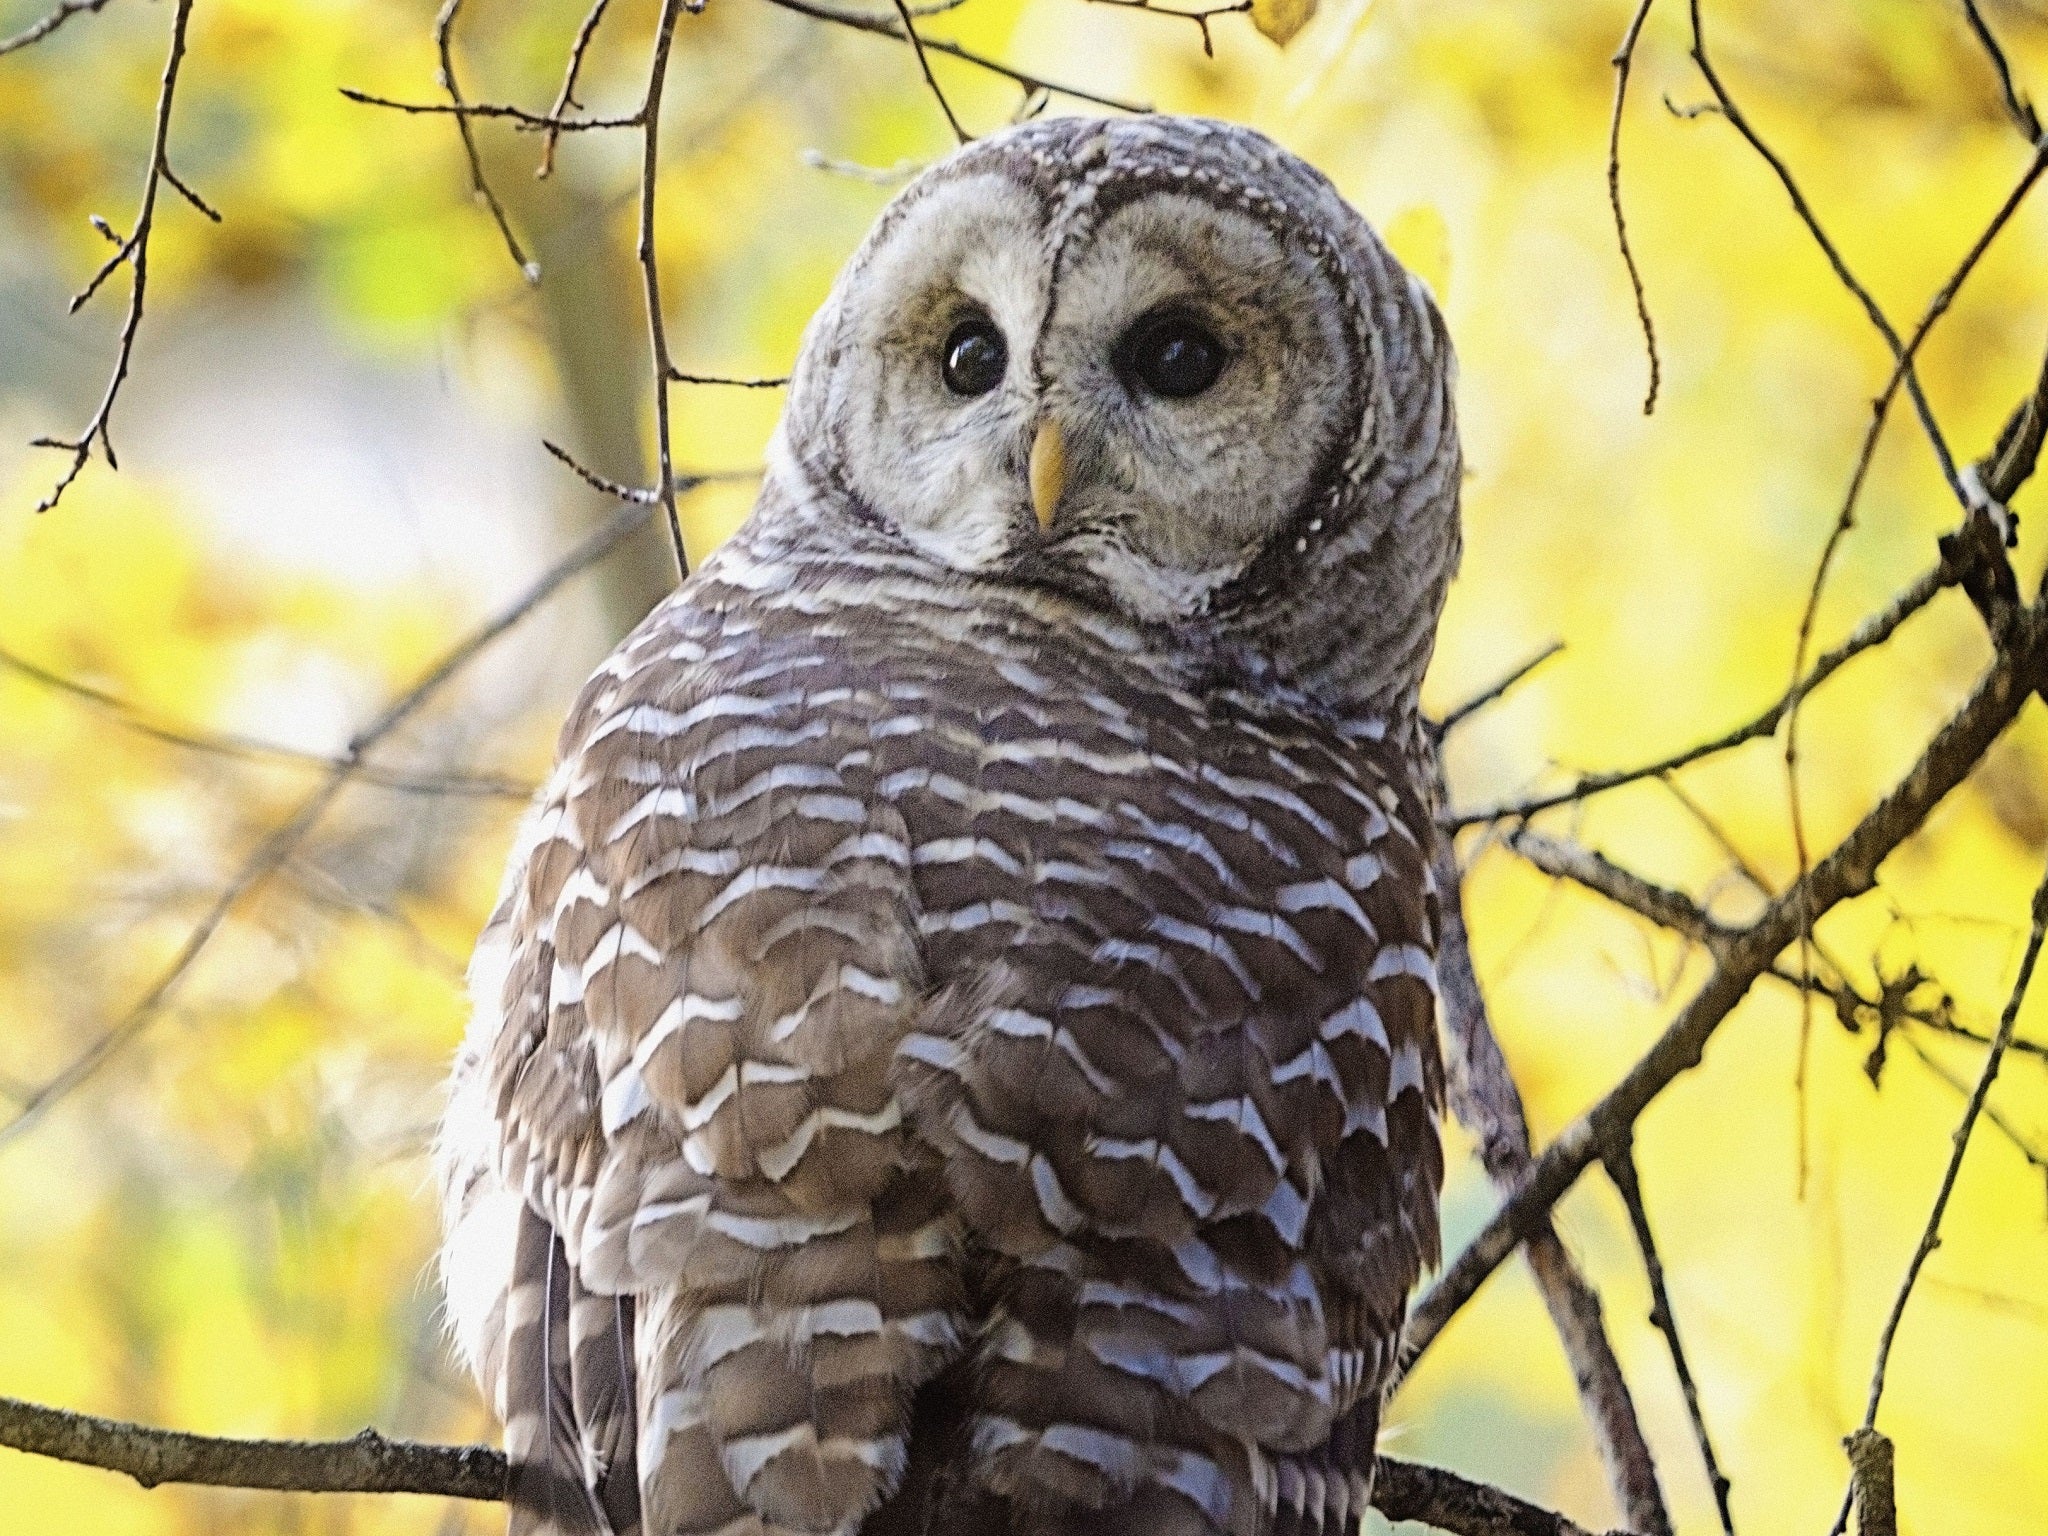 The barred owl is commonly found in North America